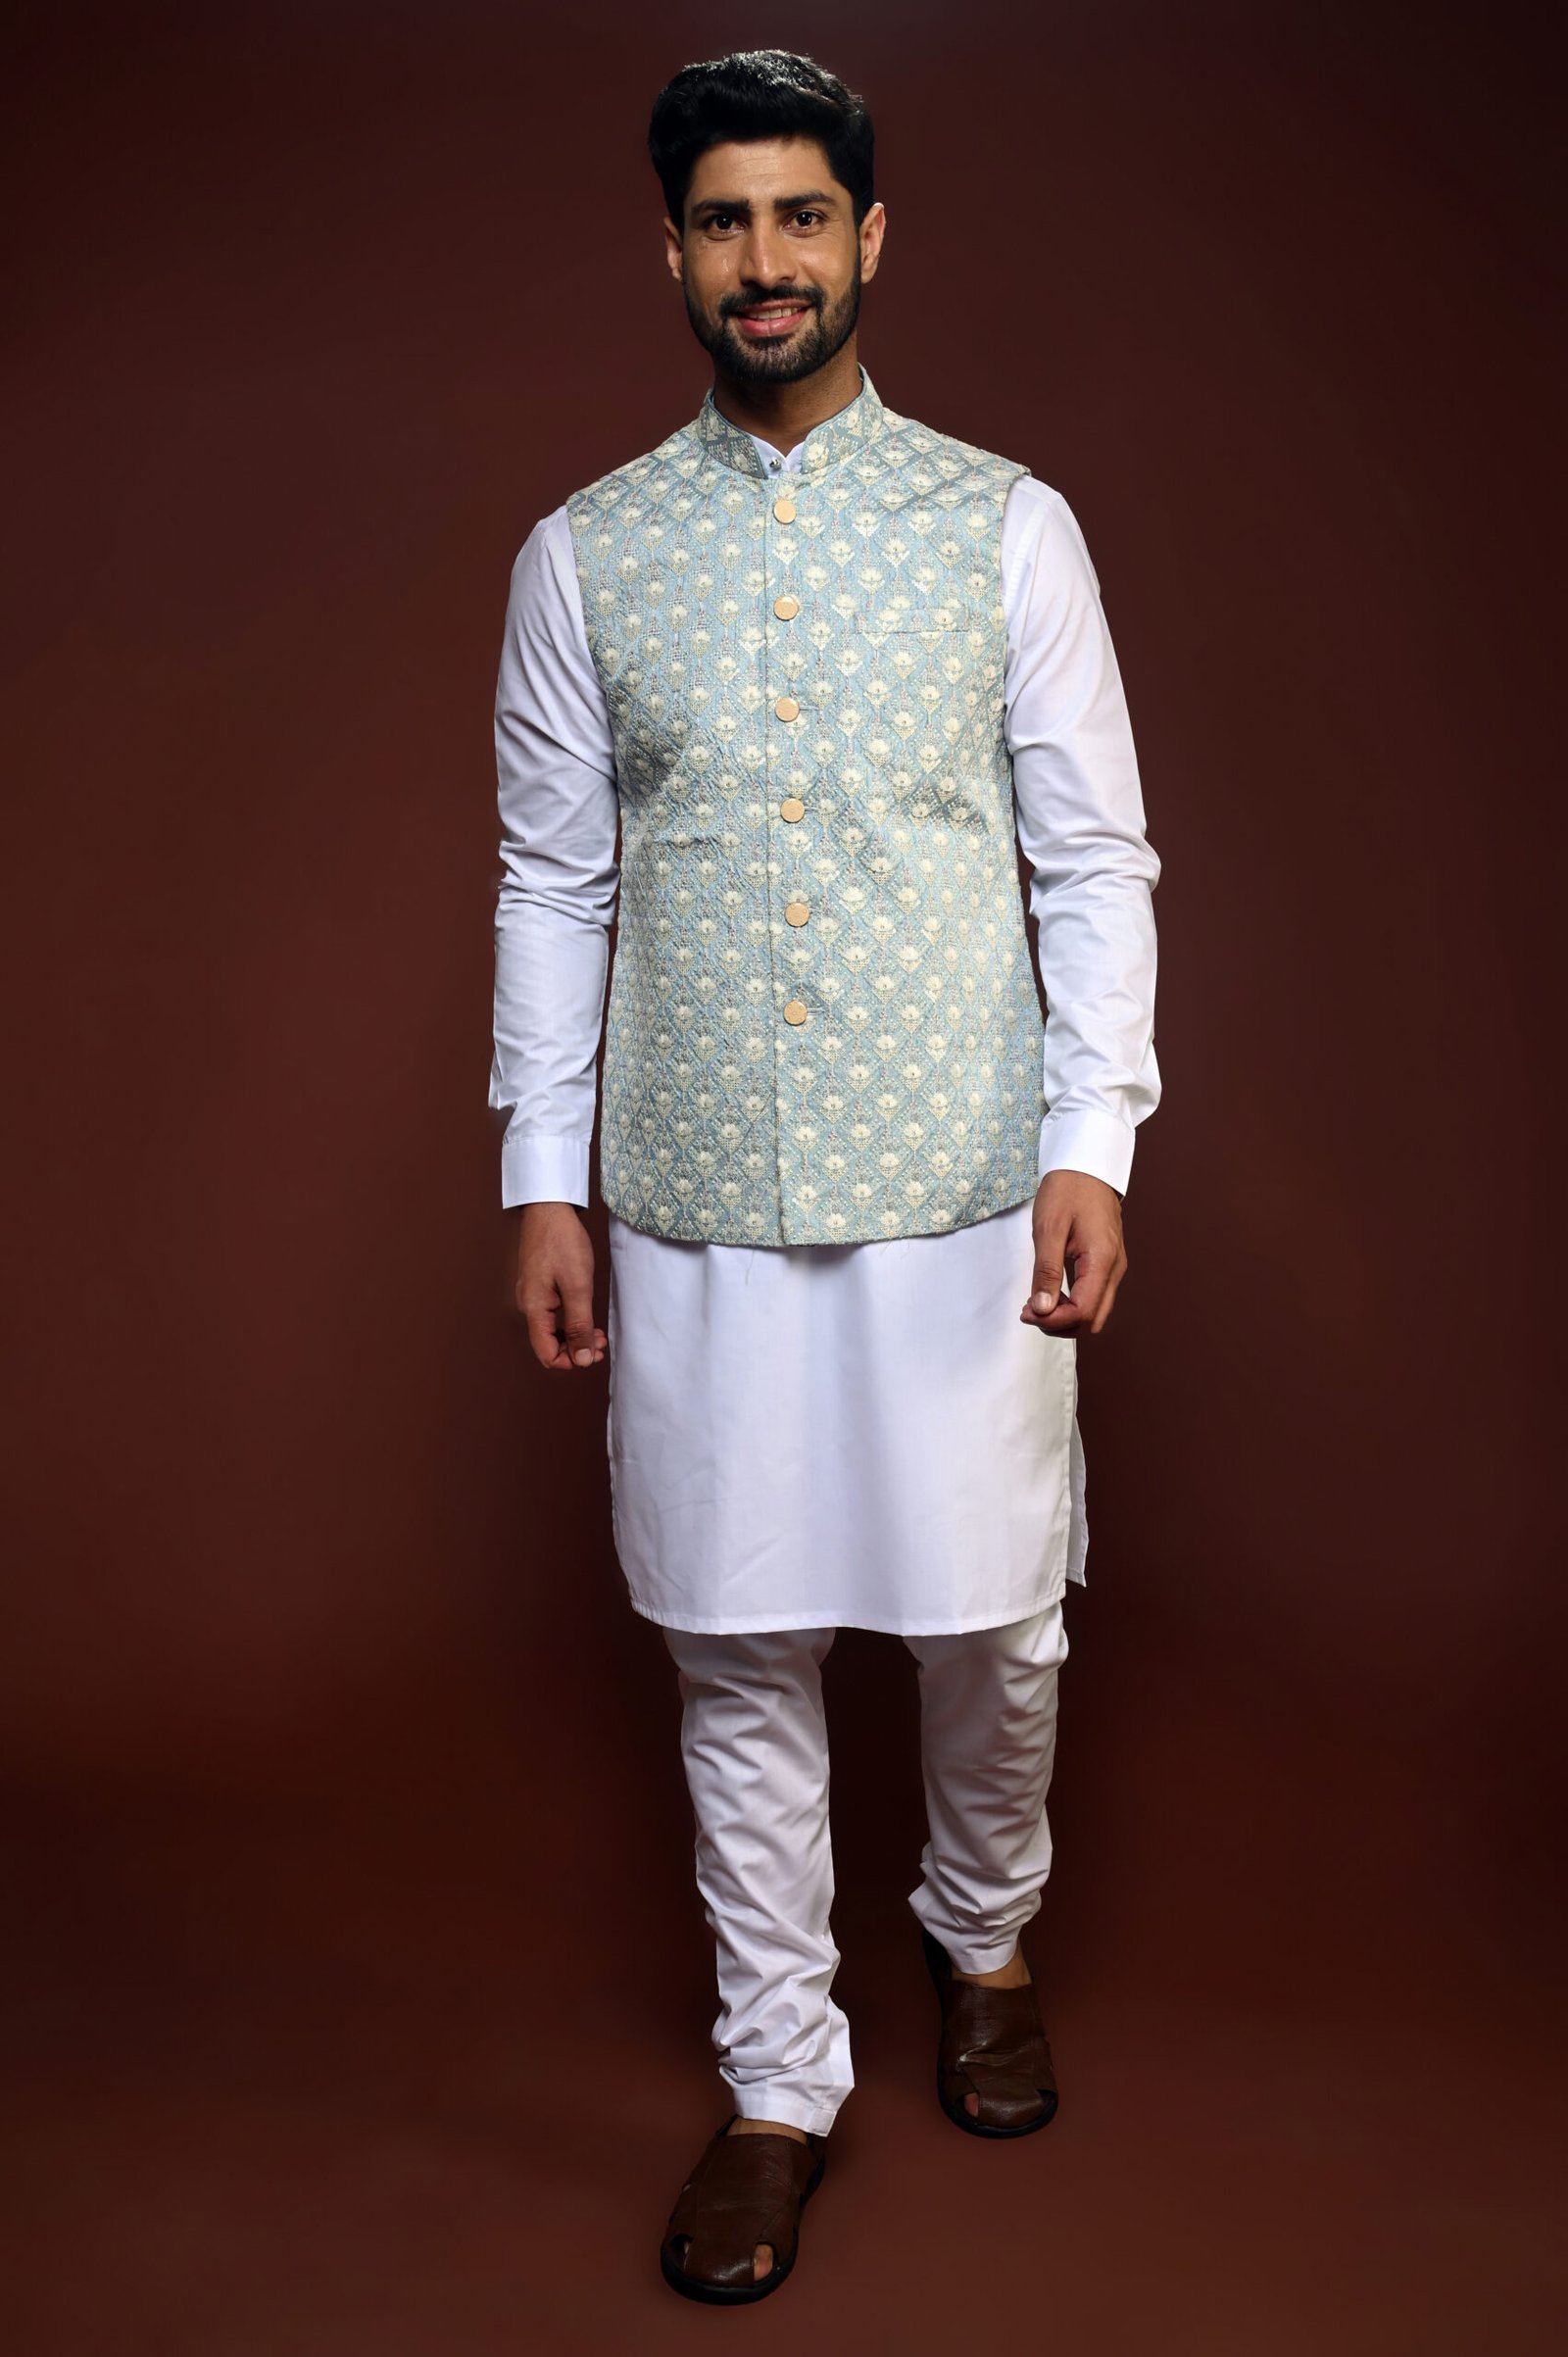 The Mao Suit and the Nehru Jacket | Indian men fashion, Mens outfits, Modi  jacket